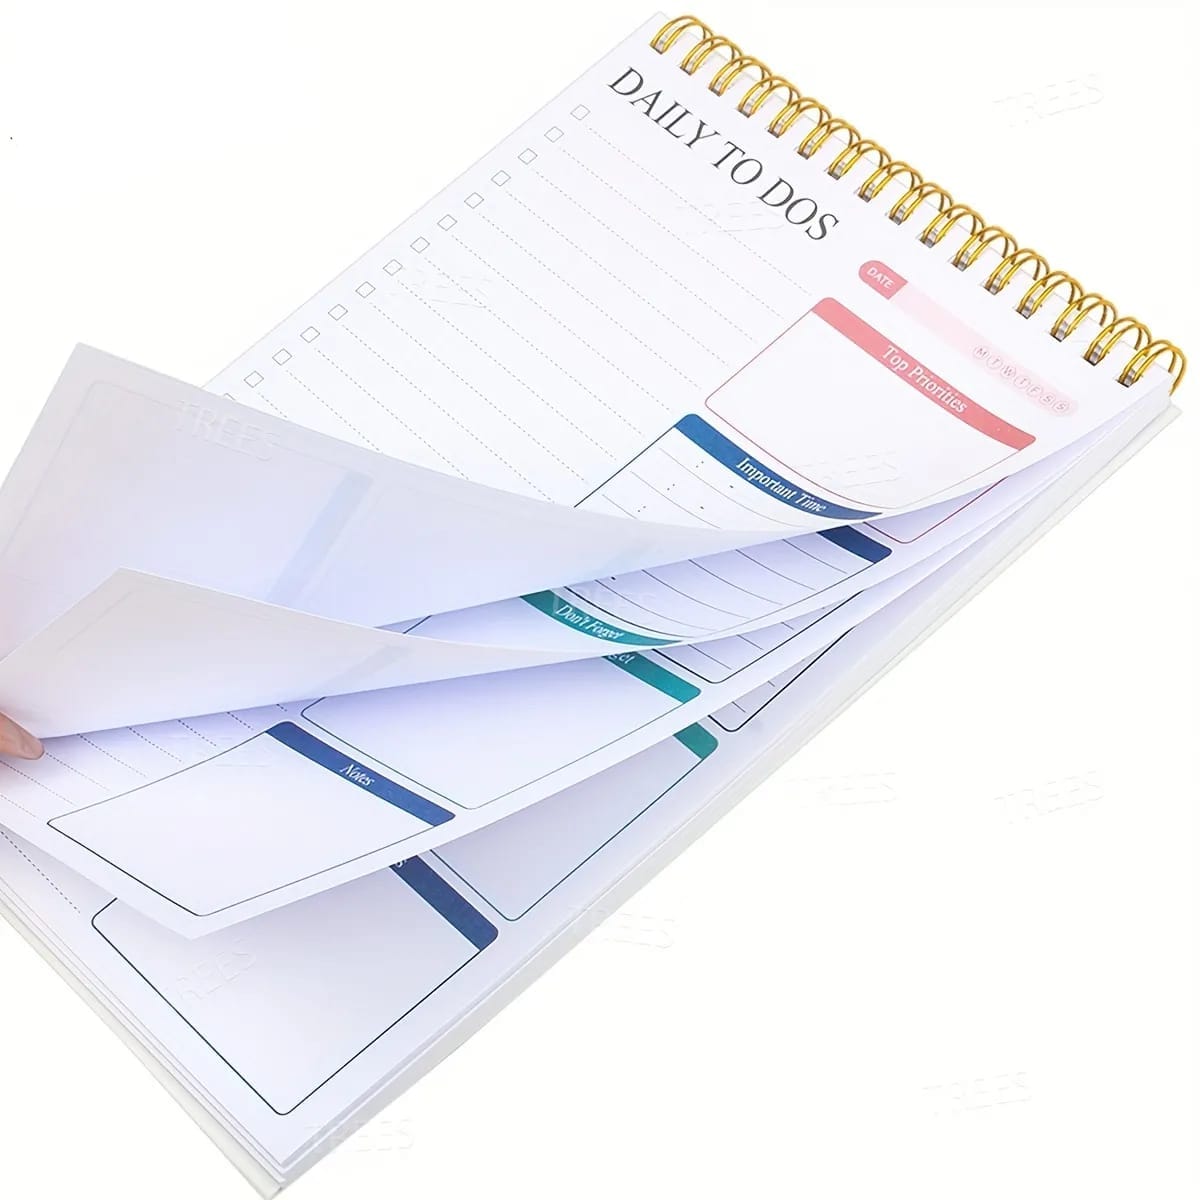 shah and company mumbai Today to do Stay Organized with Our Spiral  Planner for Students - 60 Sheets Included